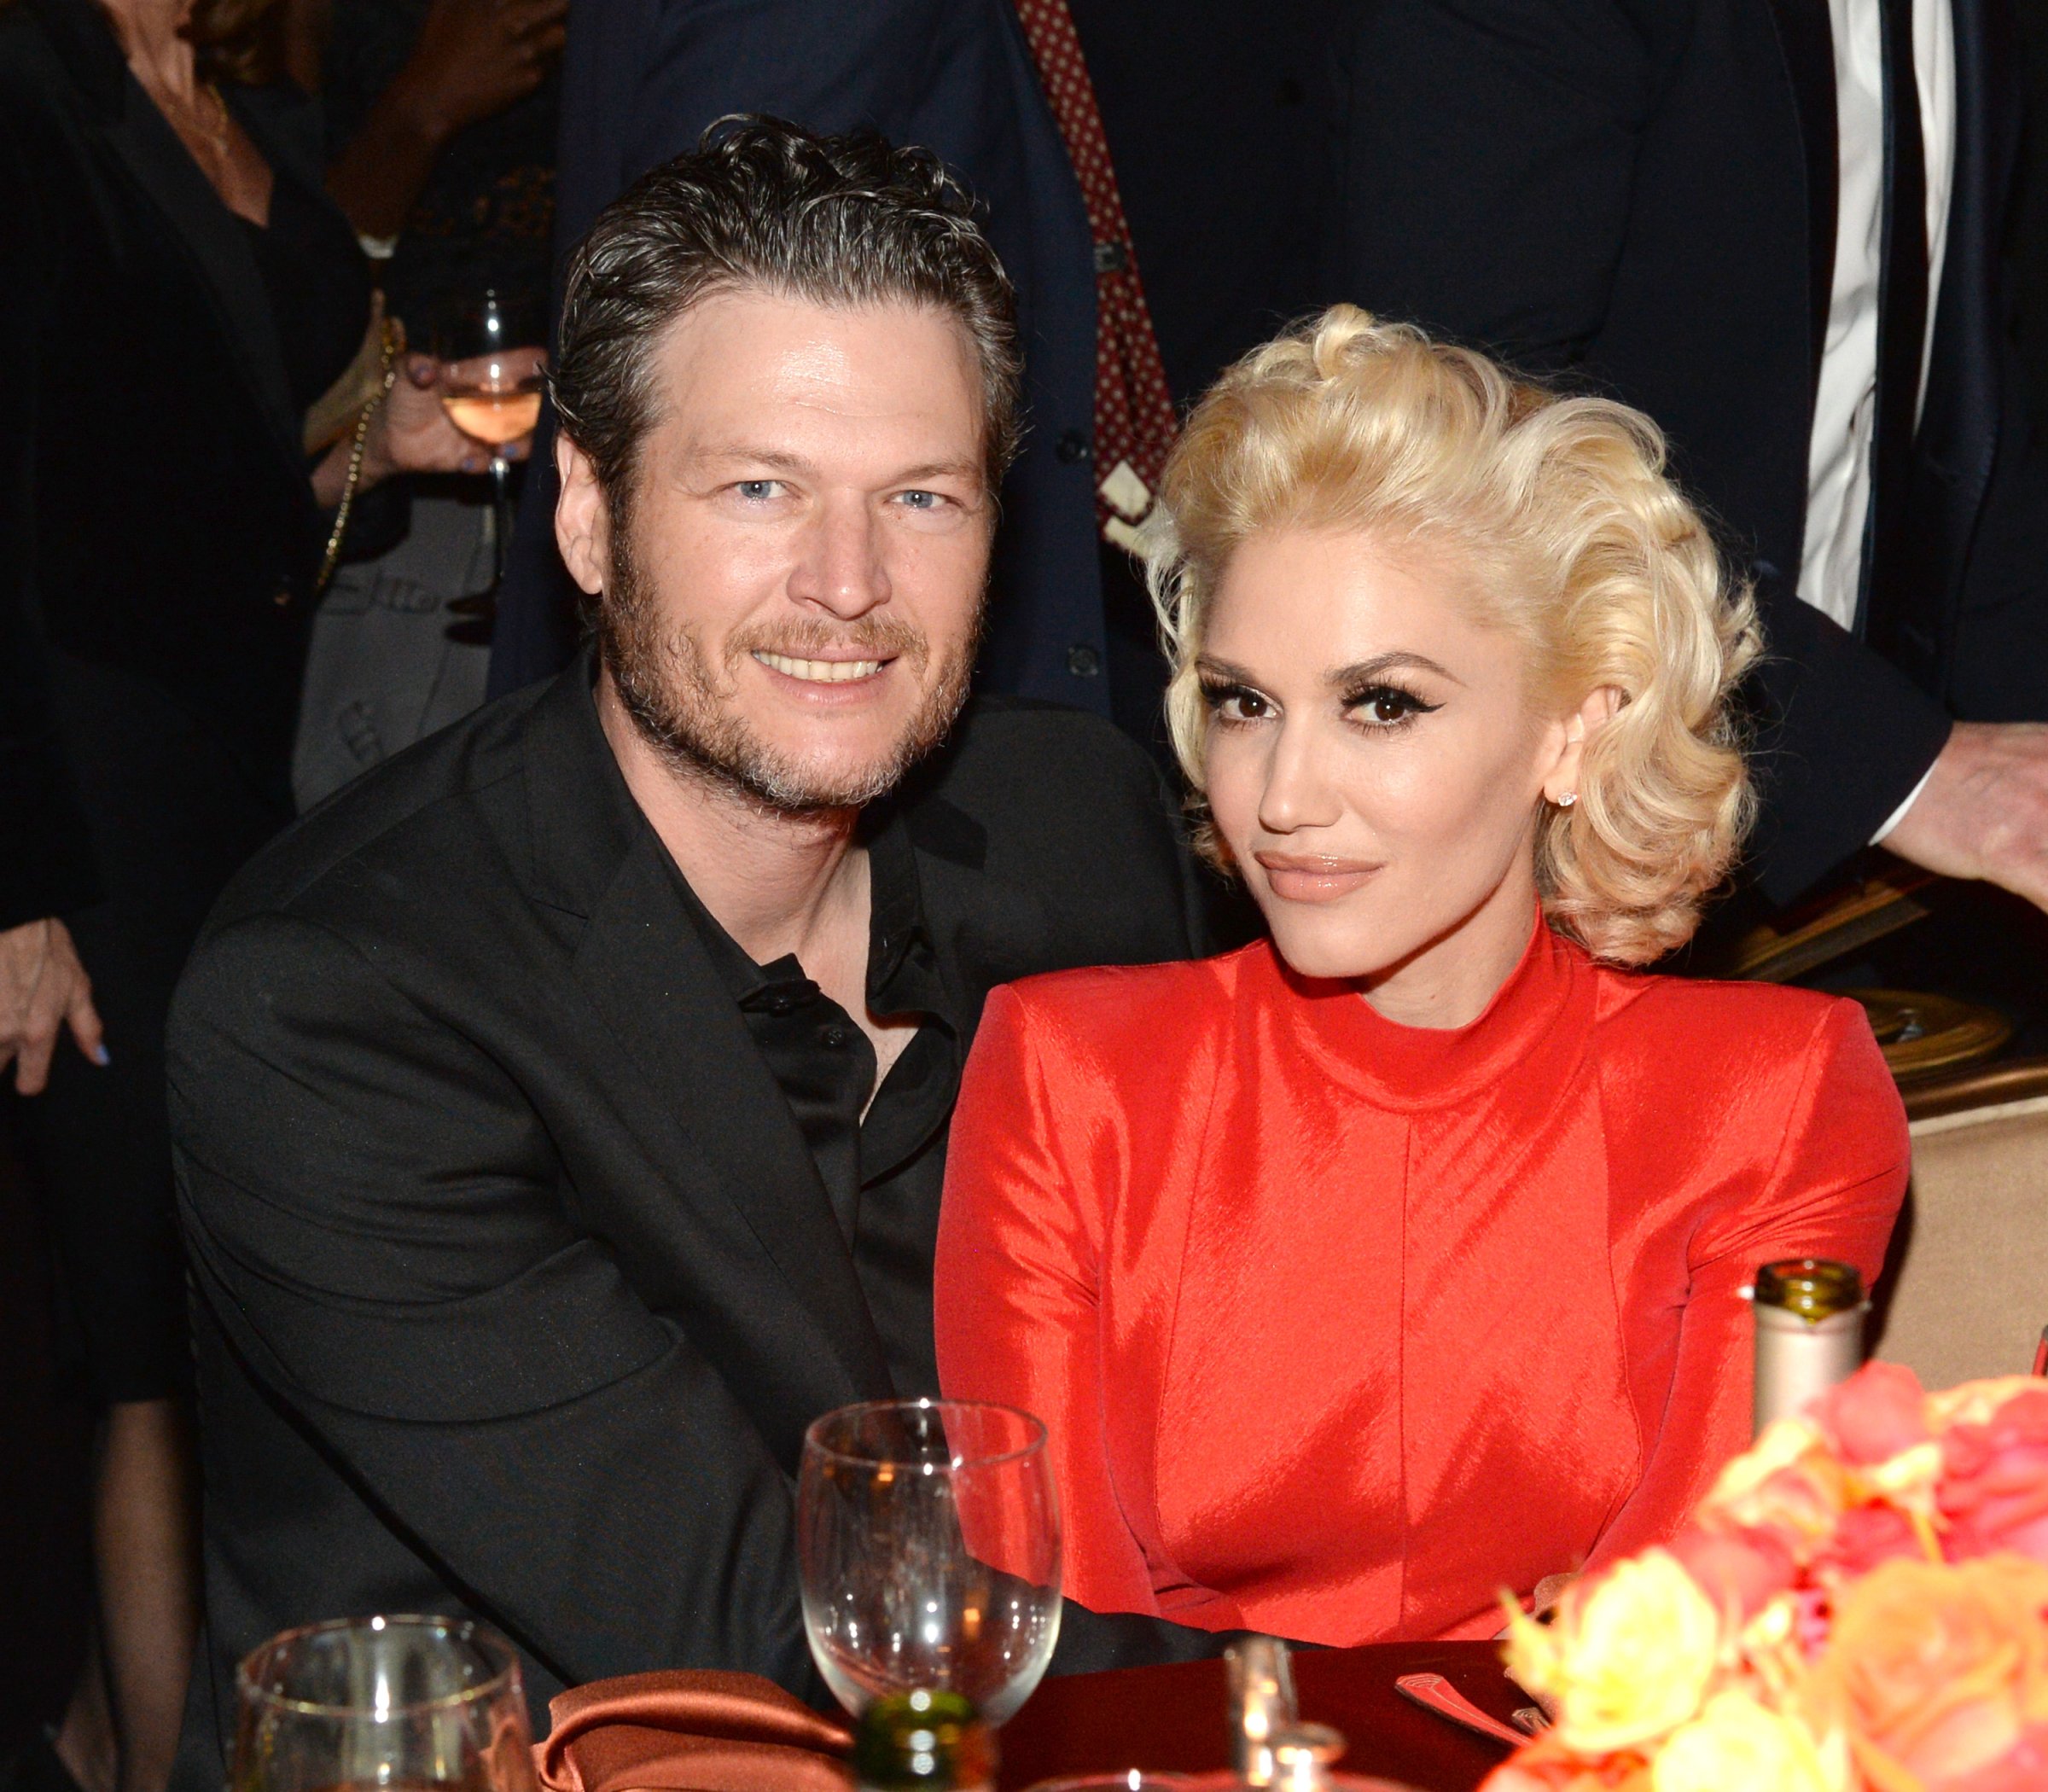 Recording artists Blake Shelton (L) and Gwen Stefani attend the 2016 Pre-GRAMMY Gala and Salute to Industry Icons honoring Irving Azoff at The Beverly Hilton Hotel on February 14, 2016 in Beverly Hills, California.